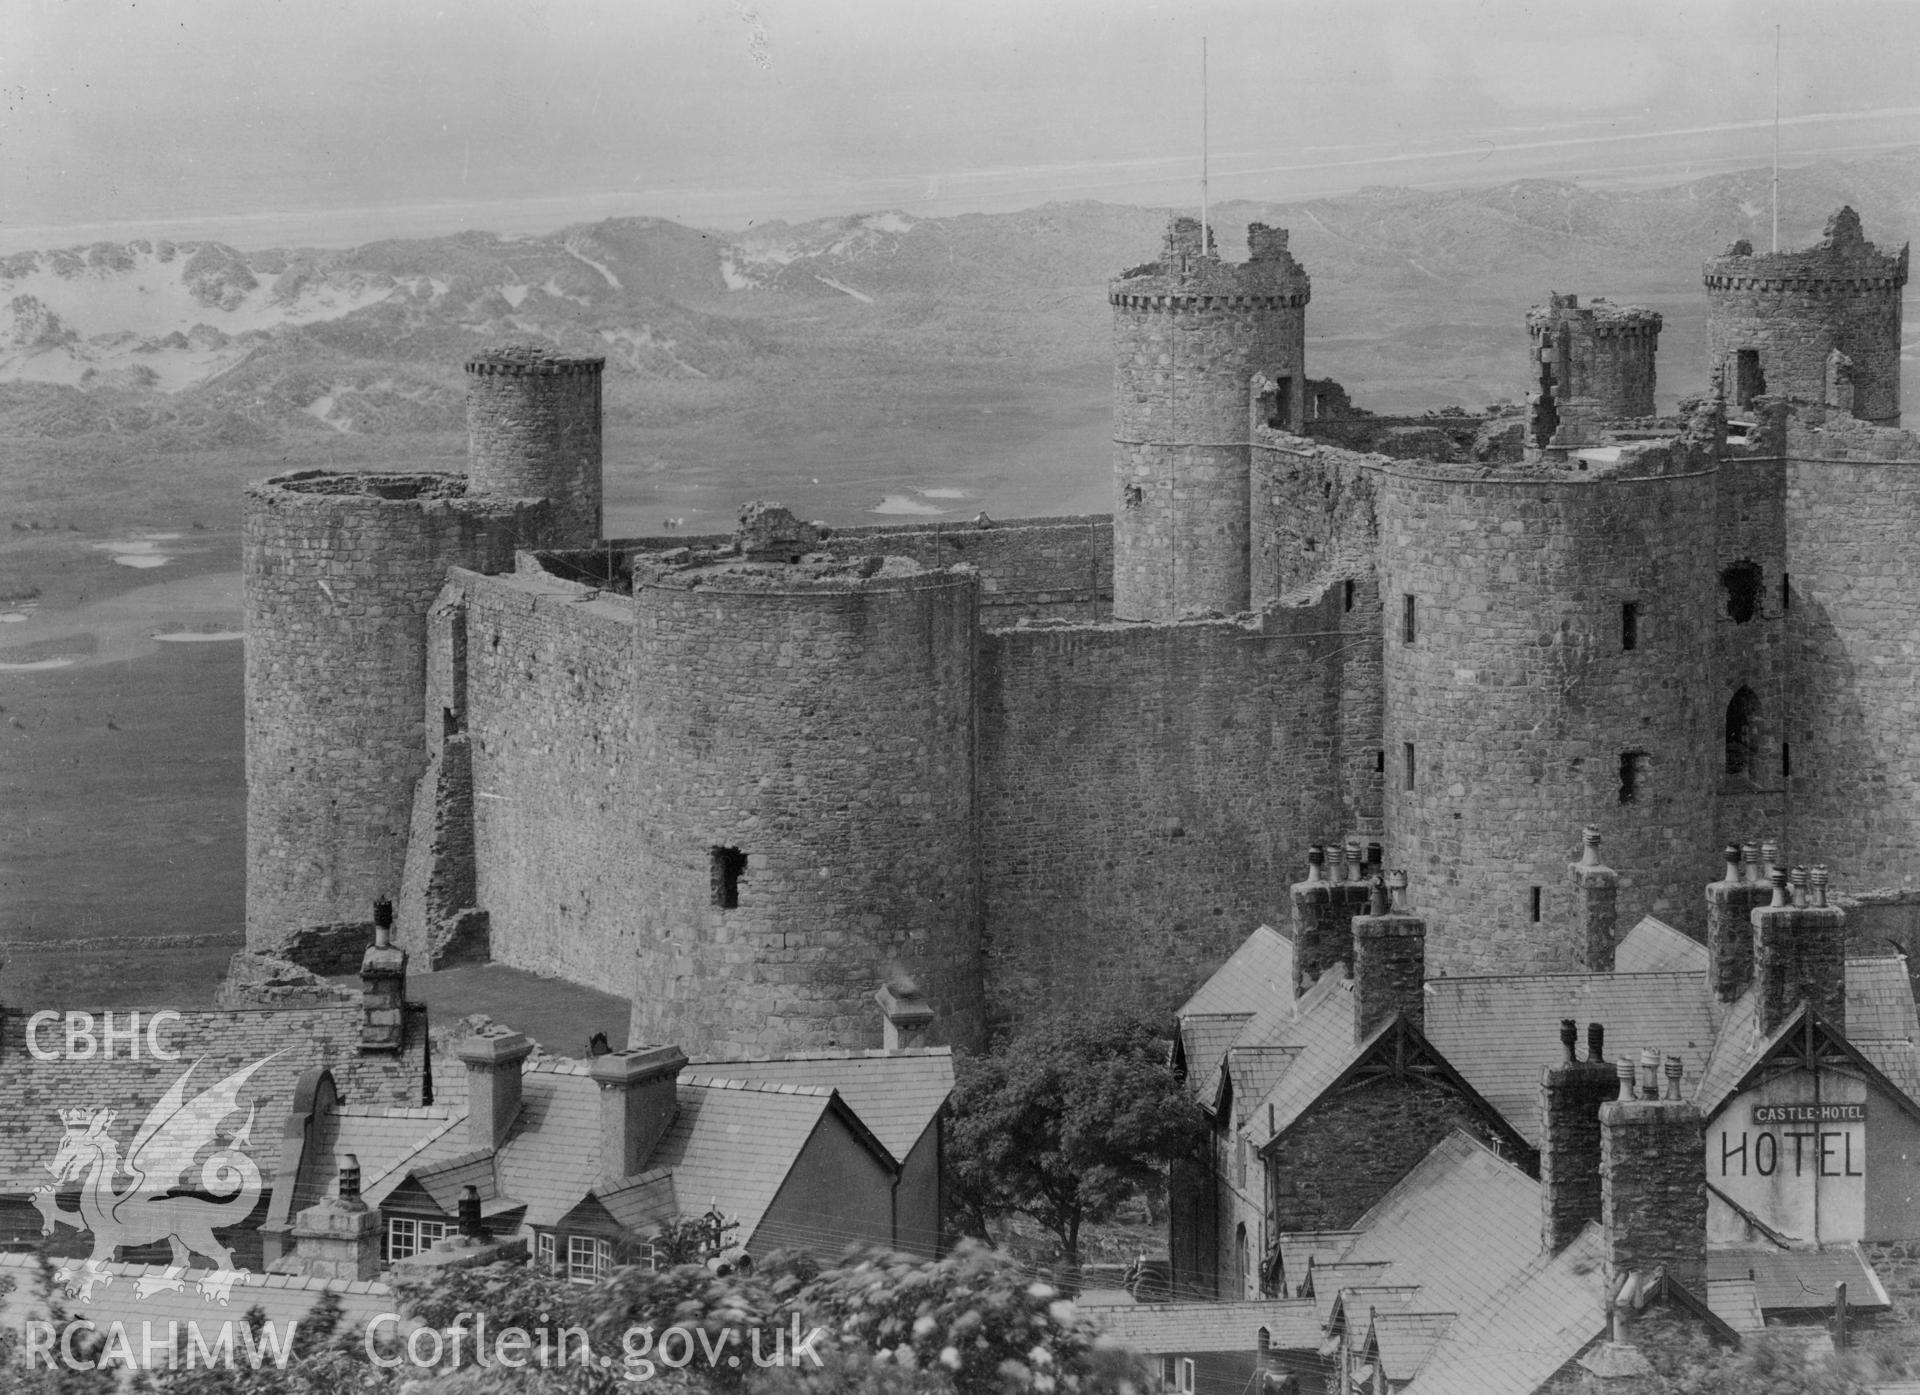 Digital copy of black and white image showing Harlech Castle: south-east view of southern side of castle and gatehouse.